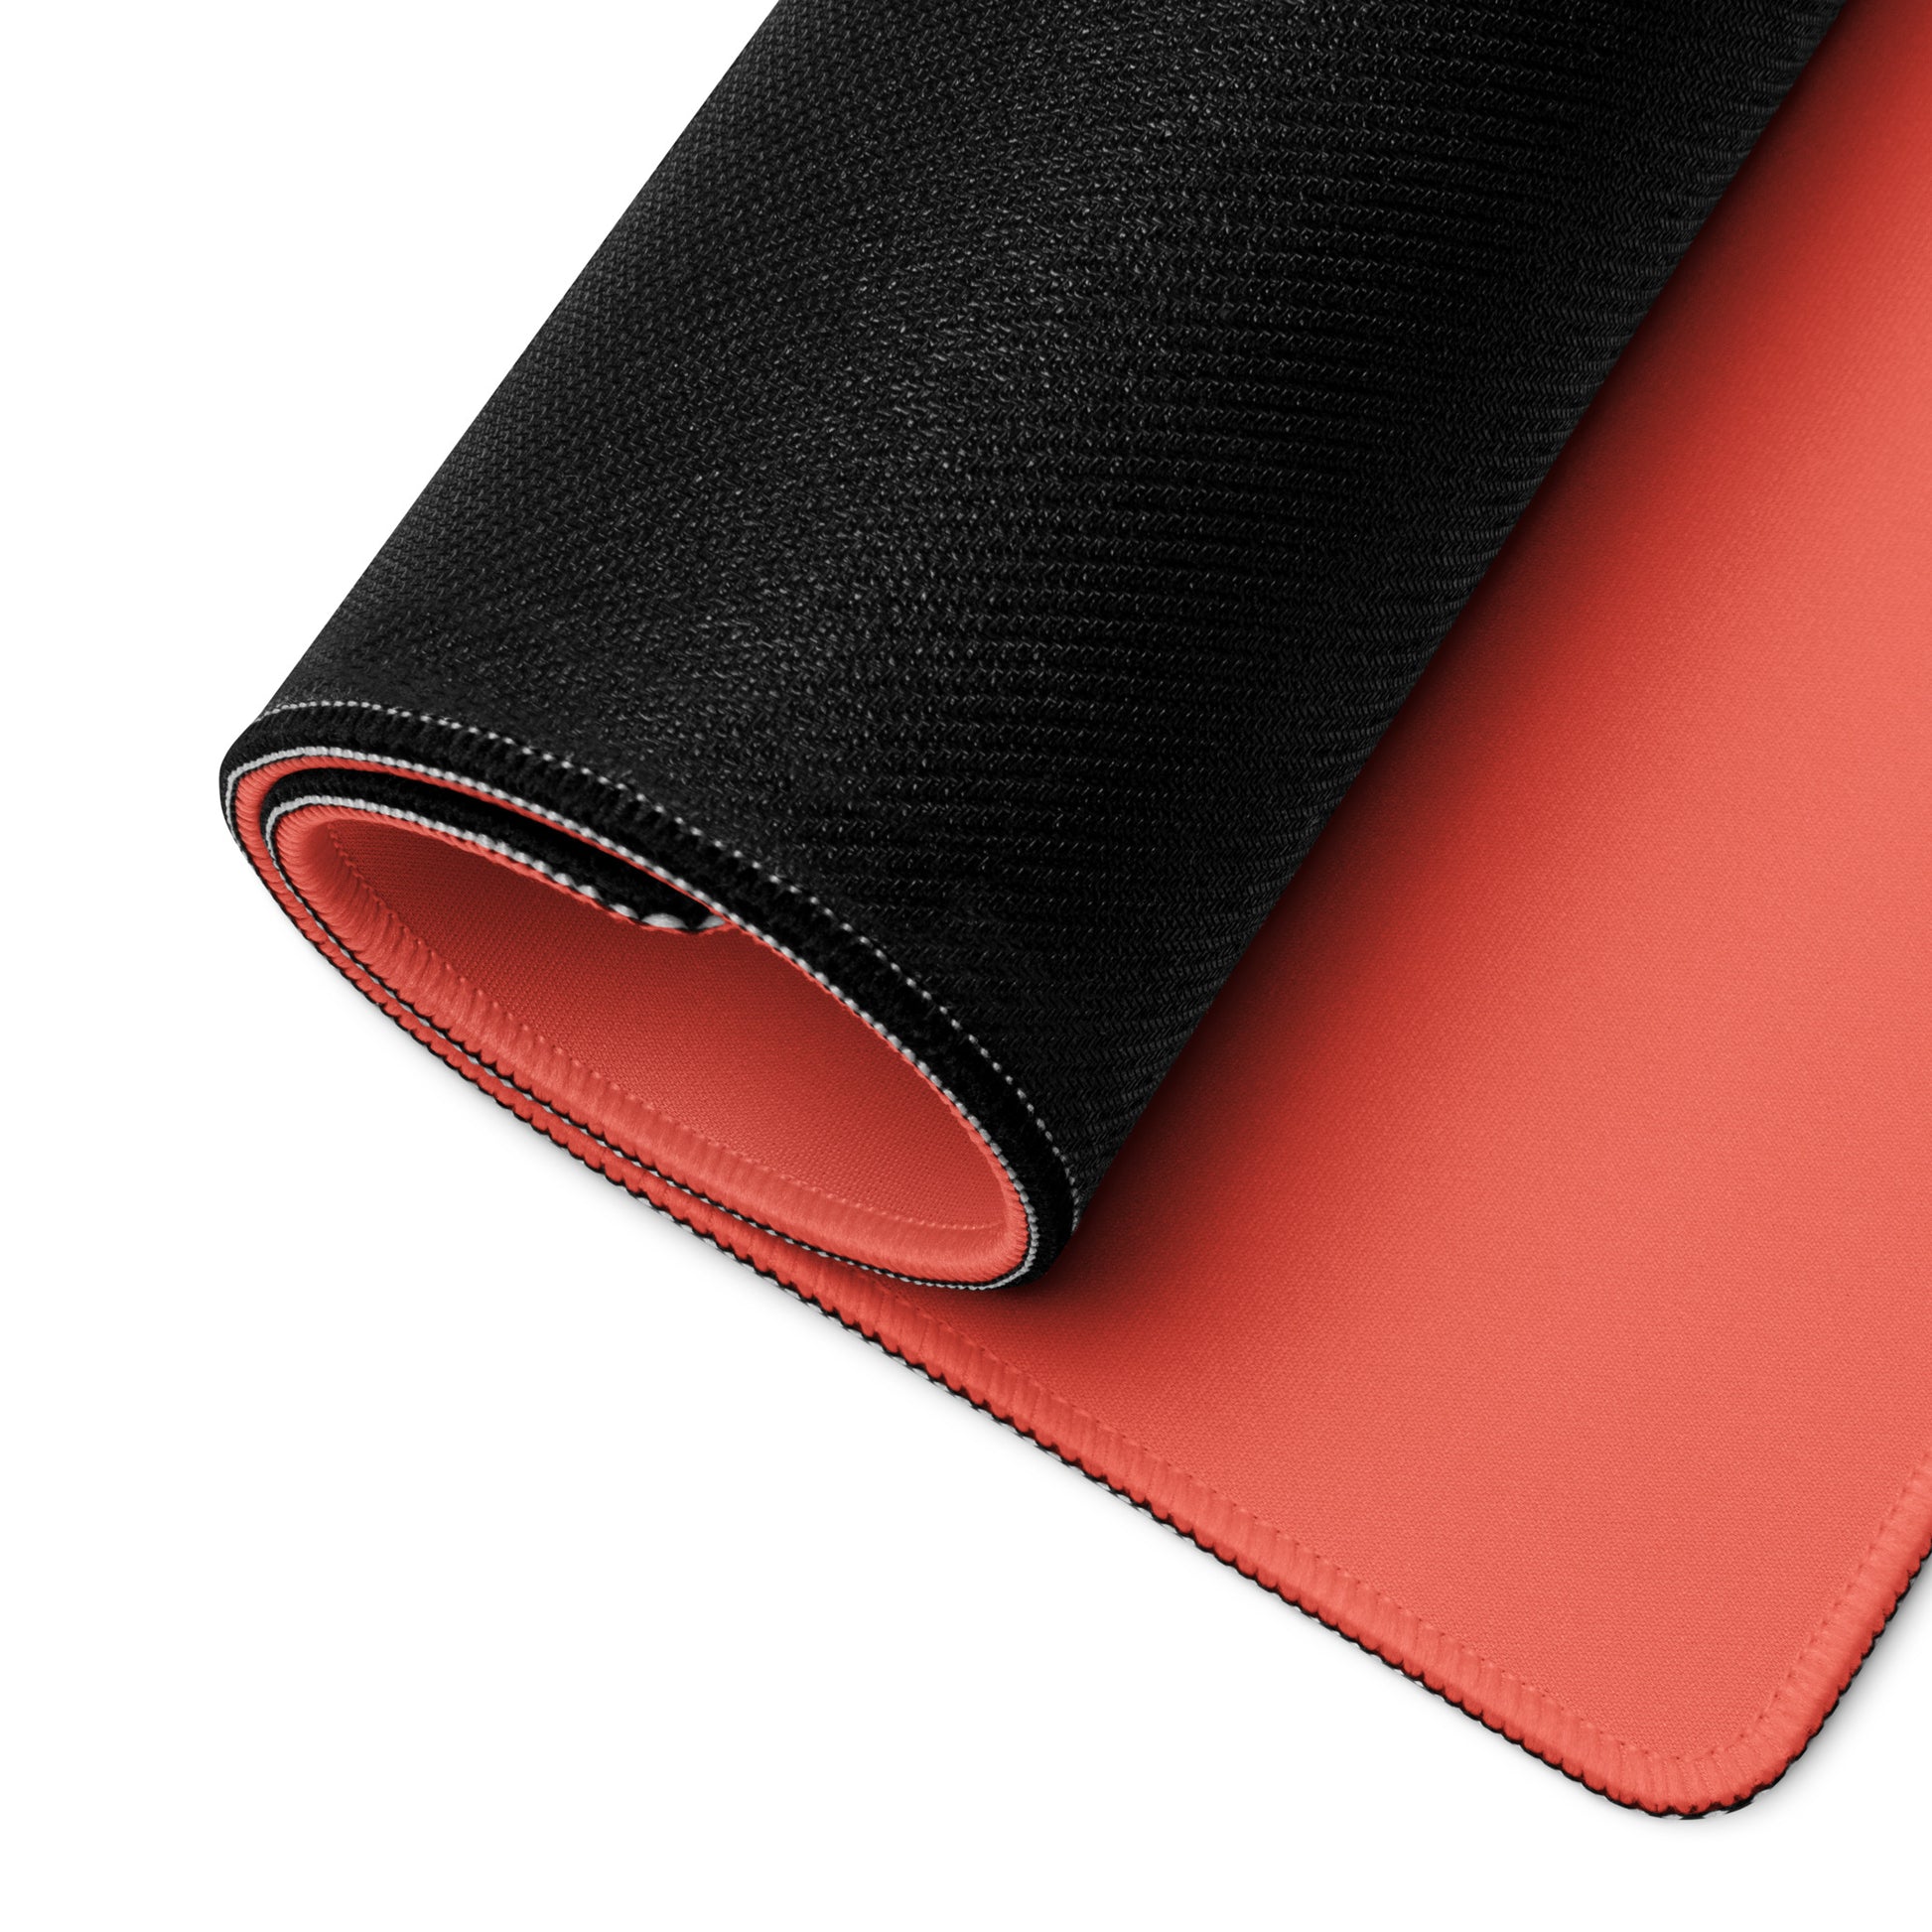 A Red 36" x 18" desk pad with cowboys dueling rolled up.